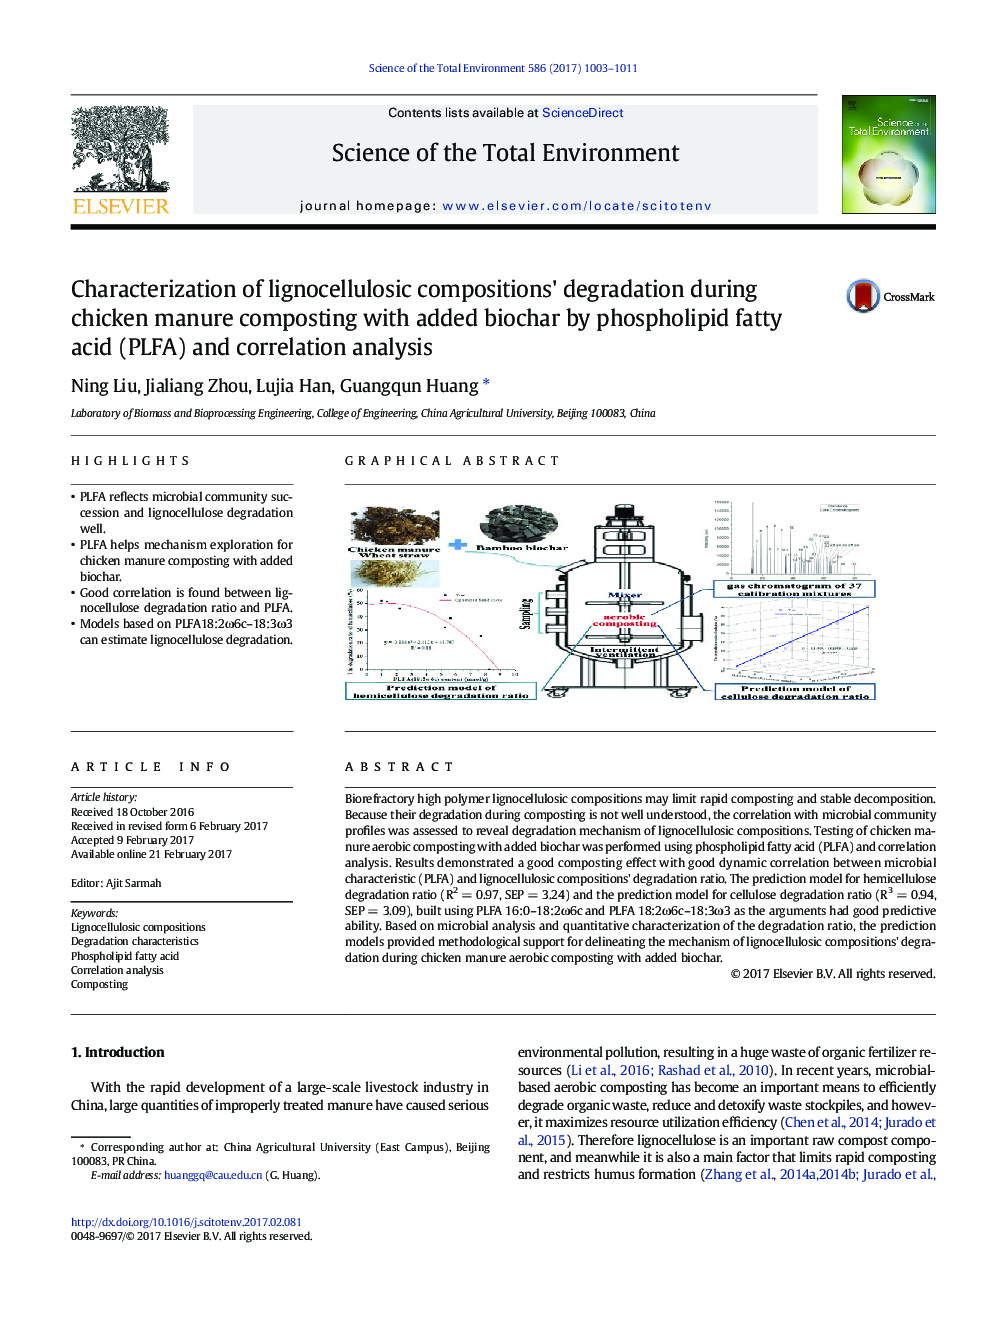 Characterization of lignocellulosic compositions' degradation during chicken manure composting with added biochar by phospholipid fatty acid (PLFA) and correlation analysis